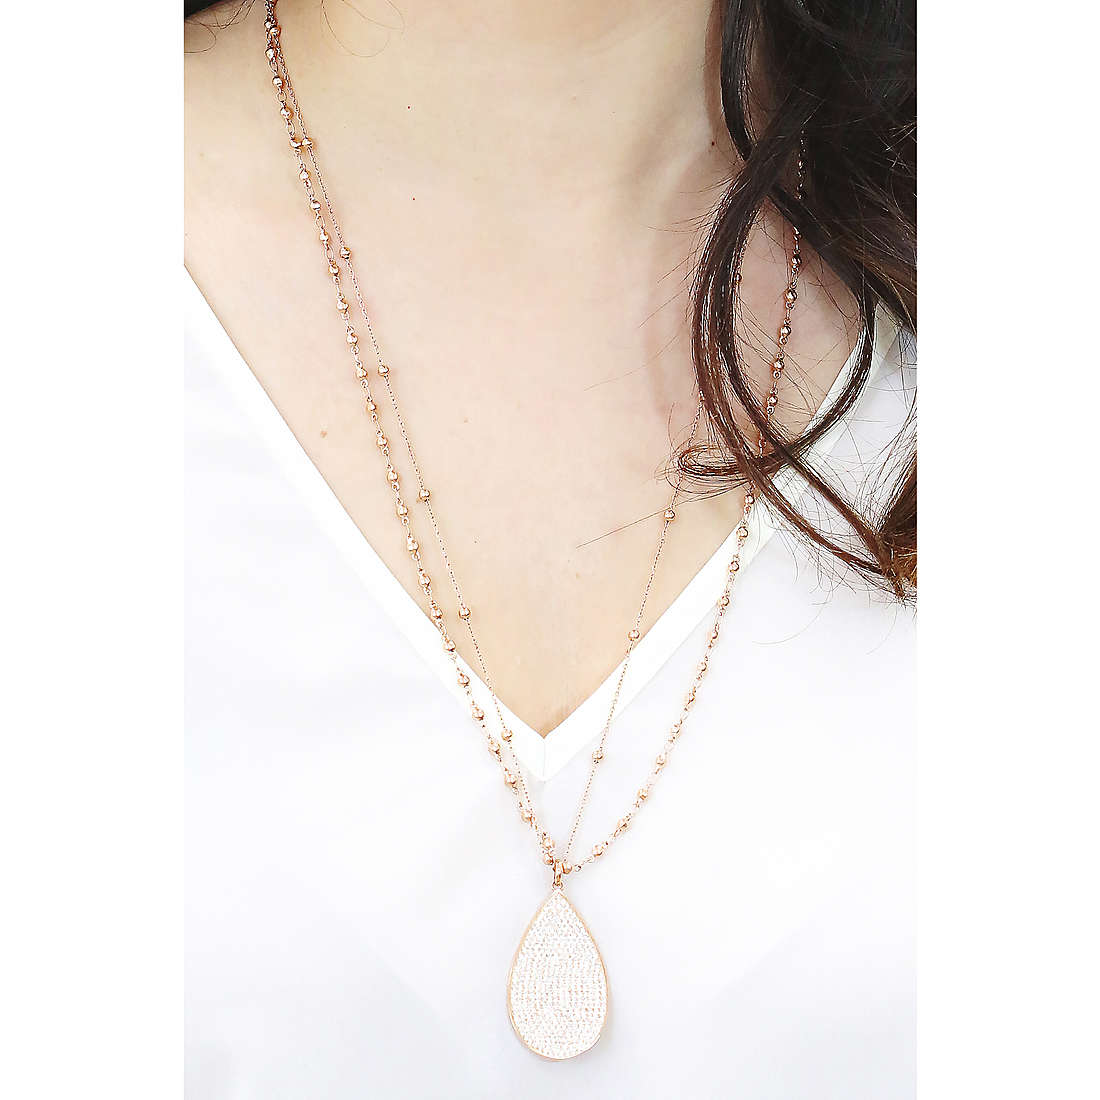 Brosway necklaces Tailor woman BIL08 wearing